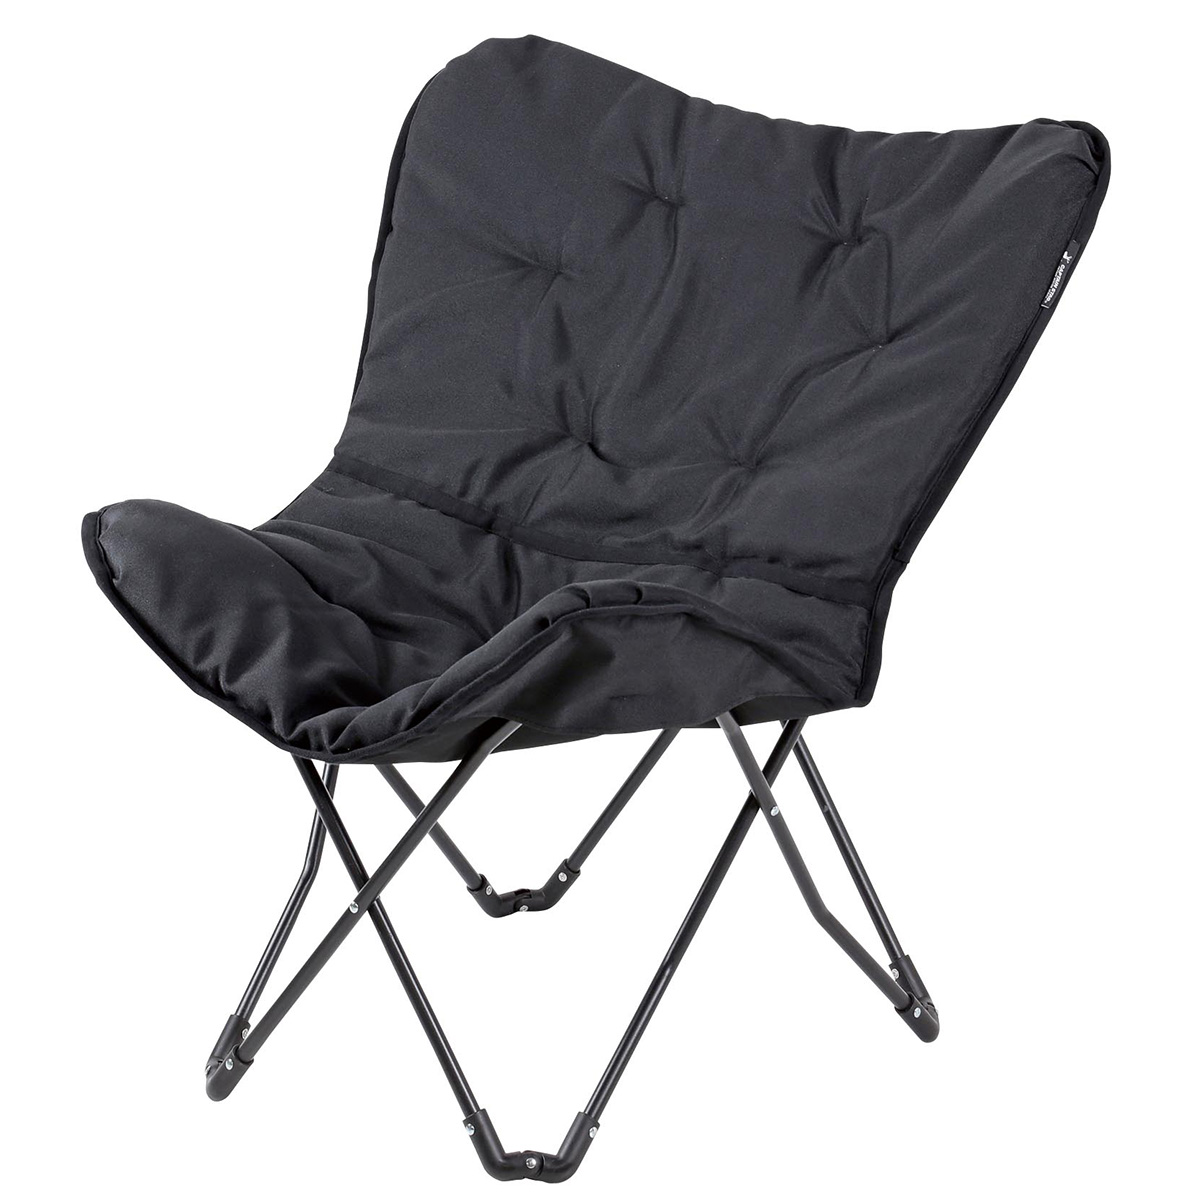 CAPTAIN STAG BLACK LABEL RELAX CUSHION CHAIR